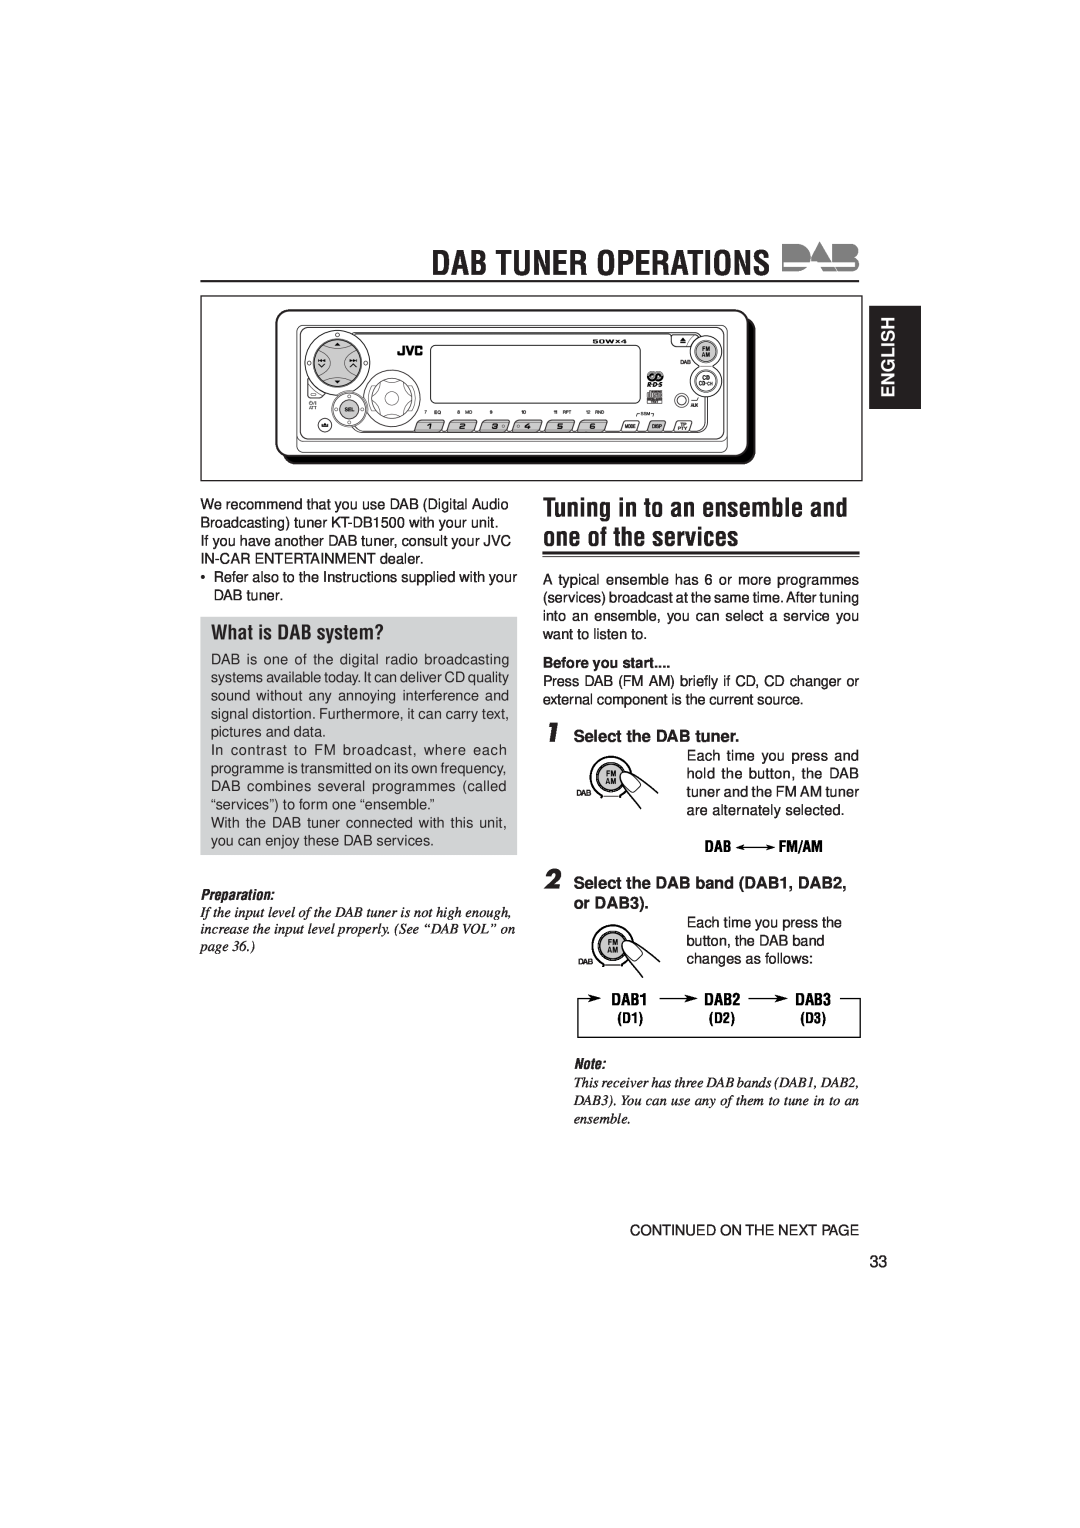 JVC KD-SX992R manual Dab Tuner Operations, Tuning in to an ensemble and one of the services, What is DAB system?, English 